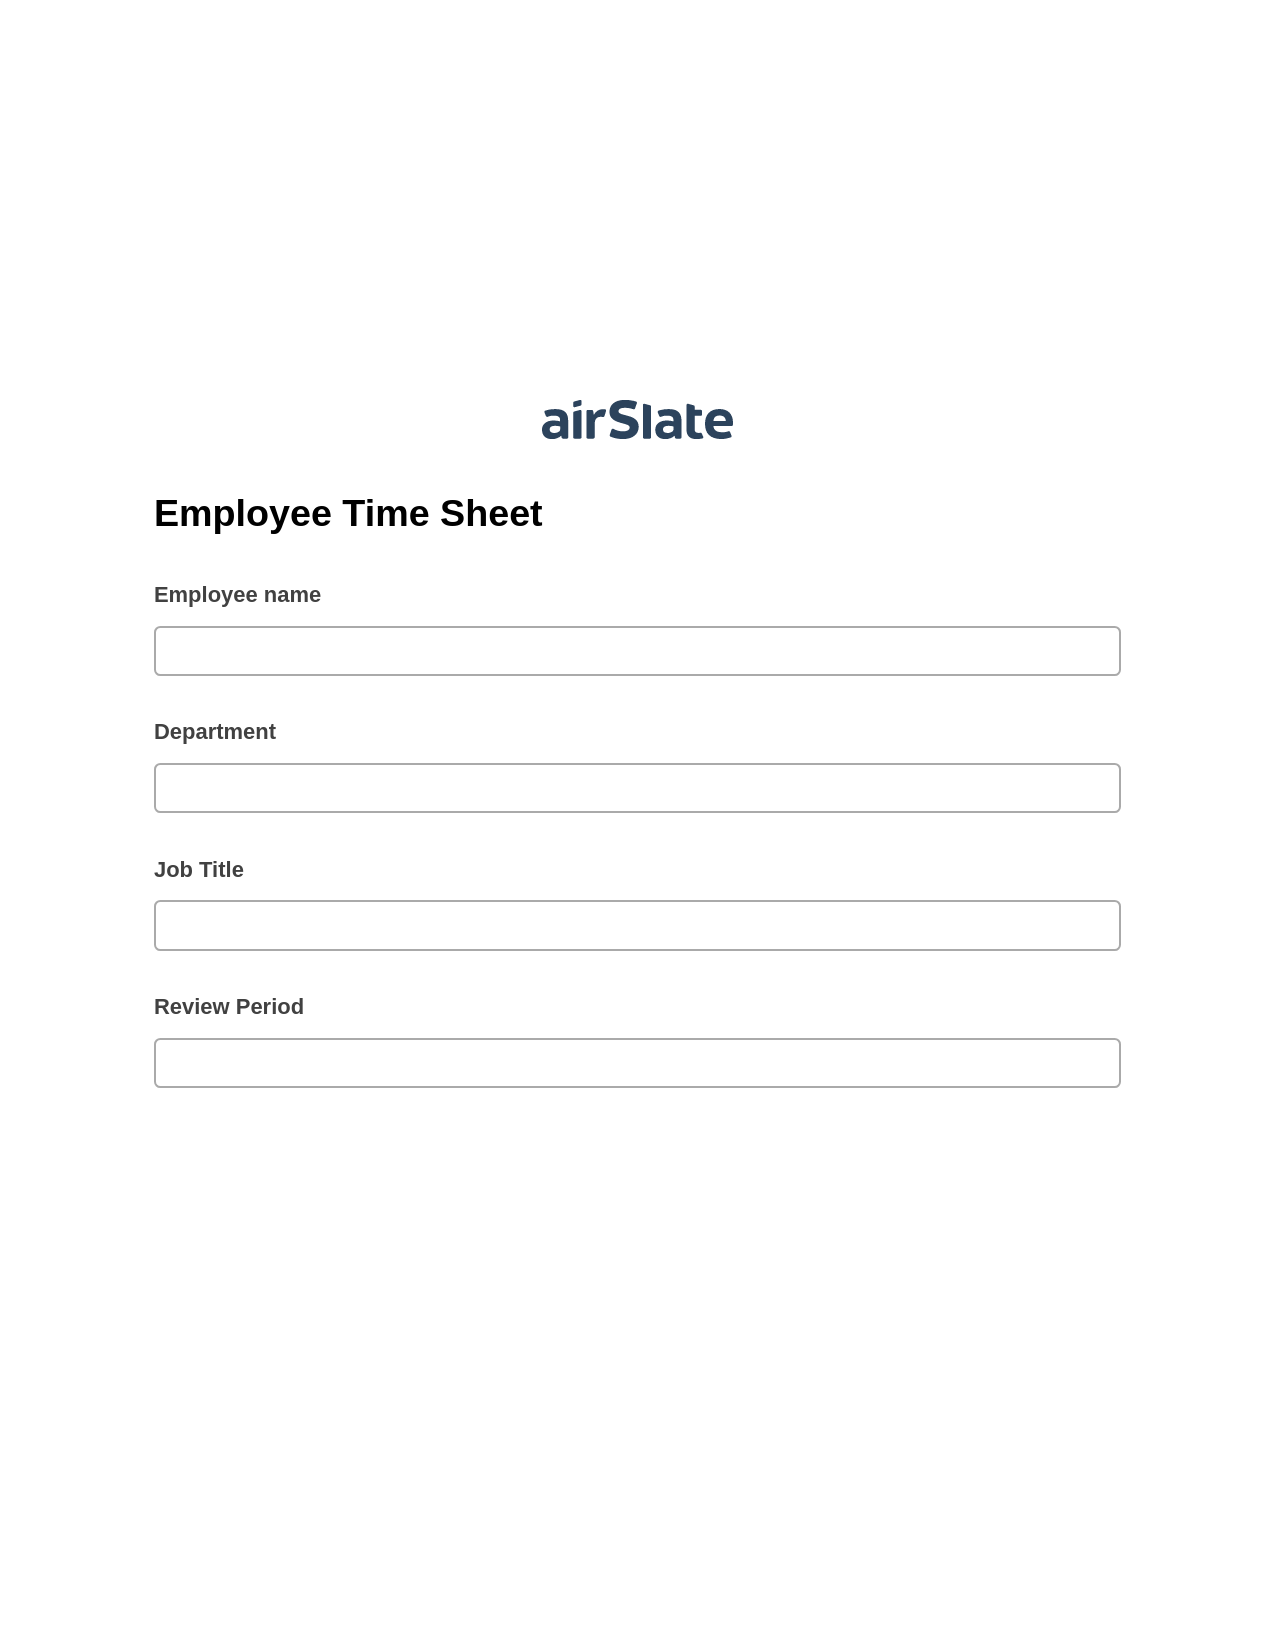 Multirole Employee Time Sheet Pre-fill from Google Sheets Bot, Create Salesforce Records Bot, Export to Smartsheet